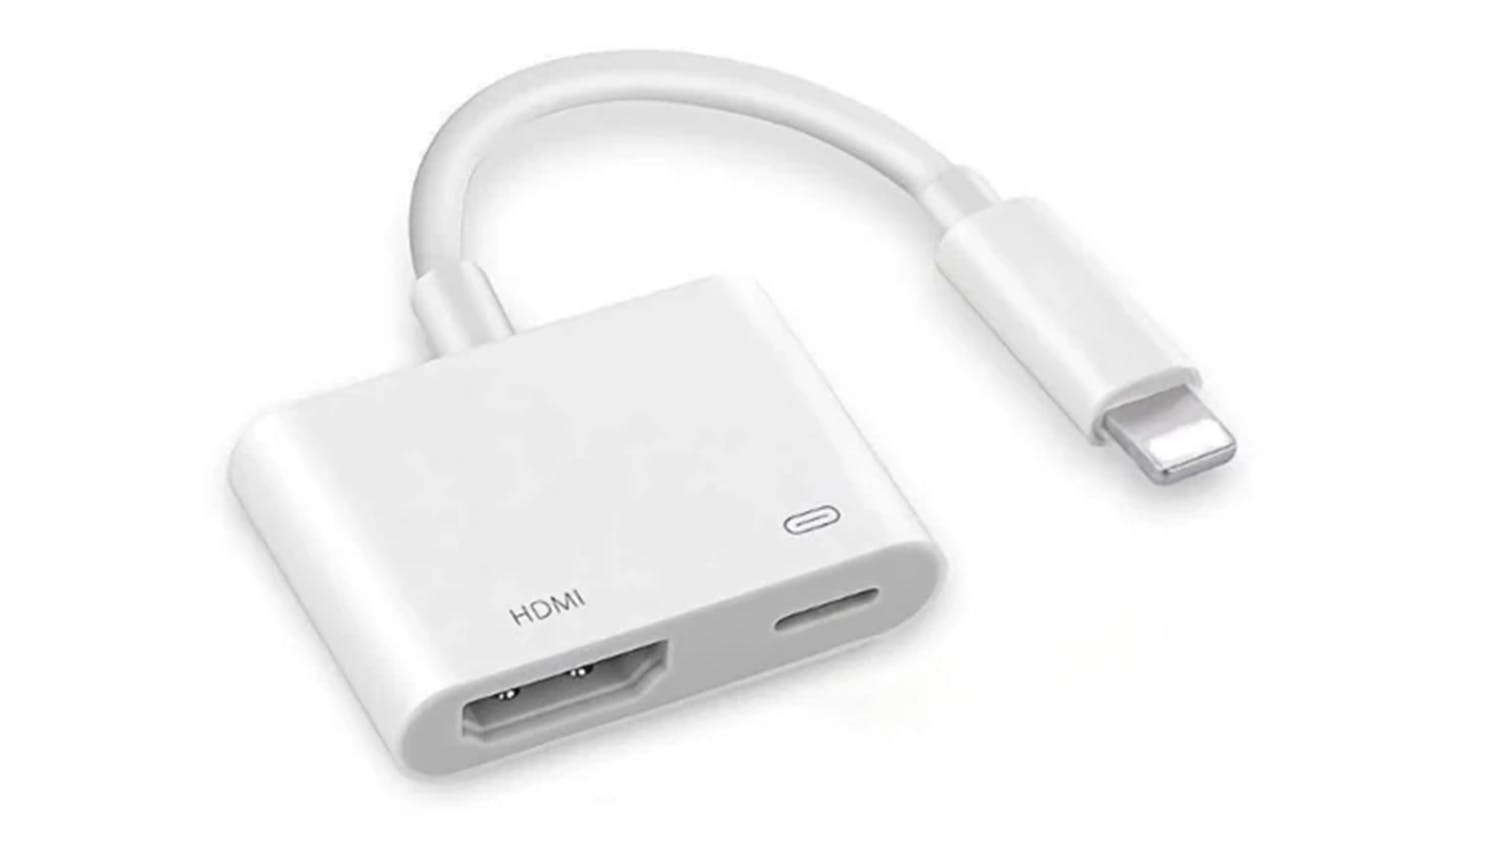 One reason for Apple's overpriced cables: The Lightning digital AV adapter  has its own ARM SoC